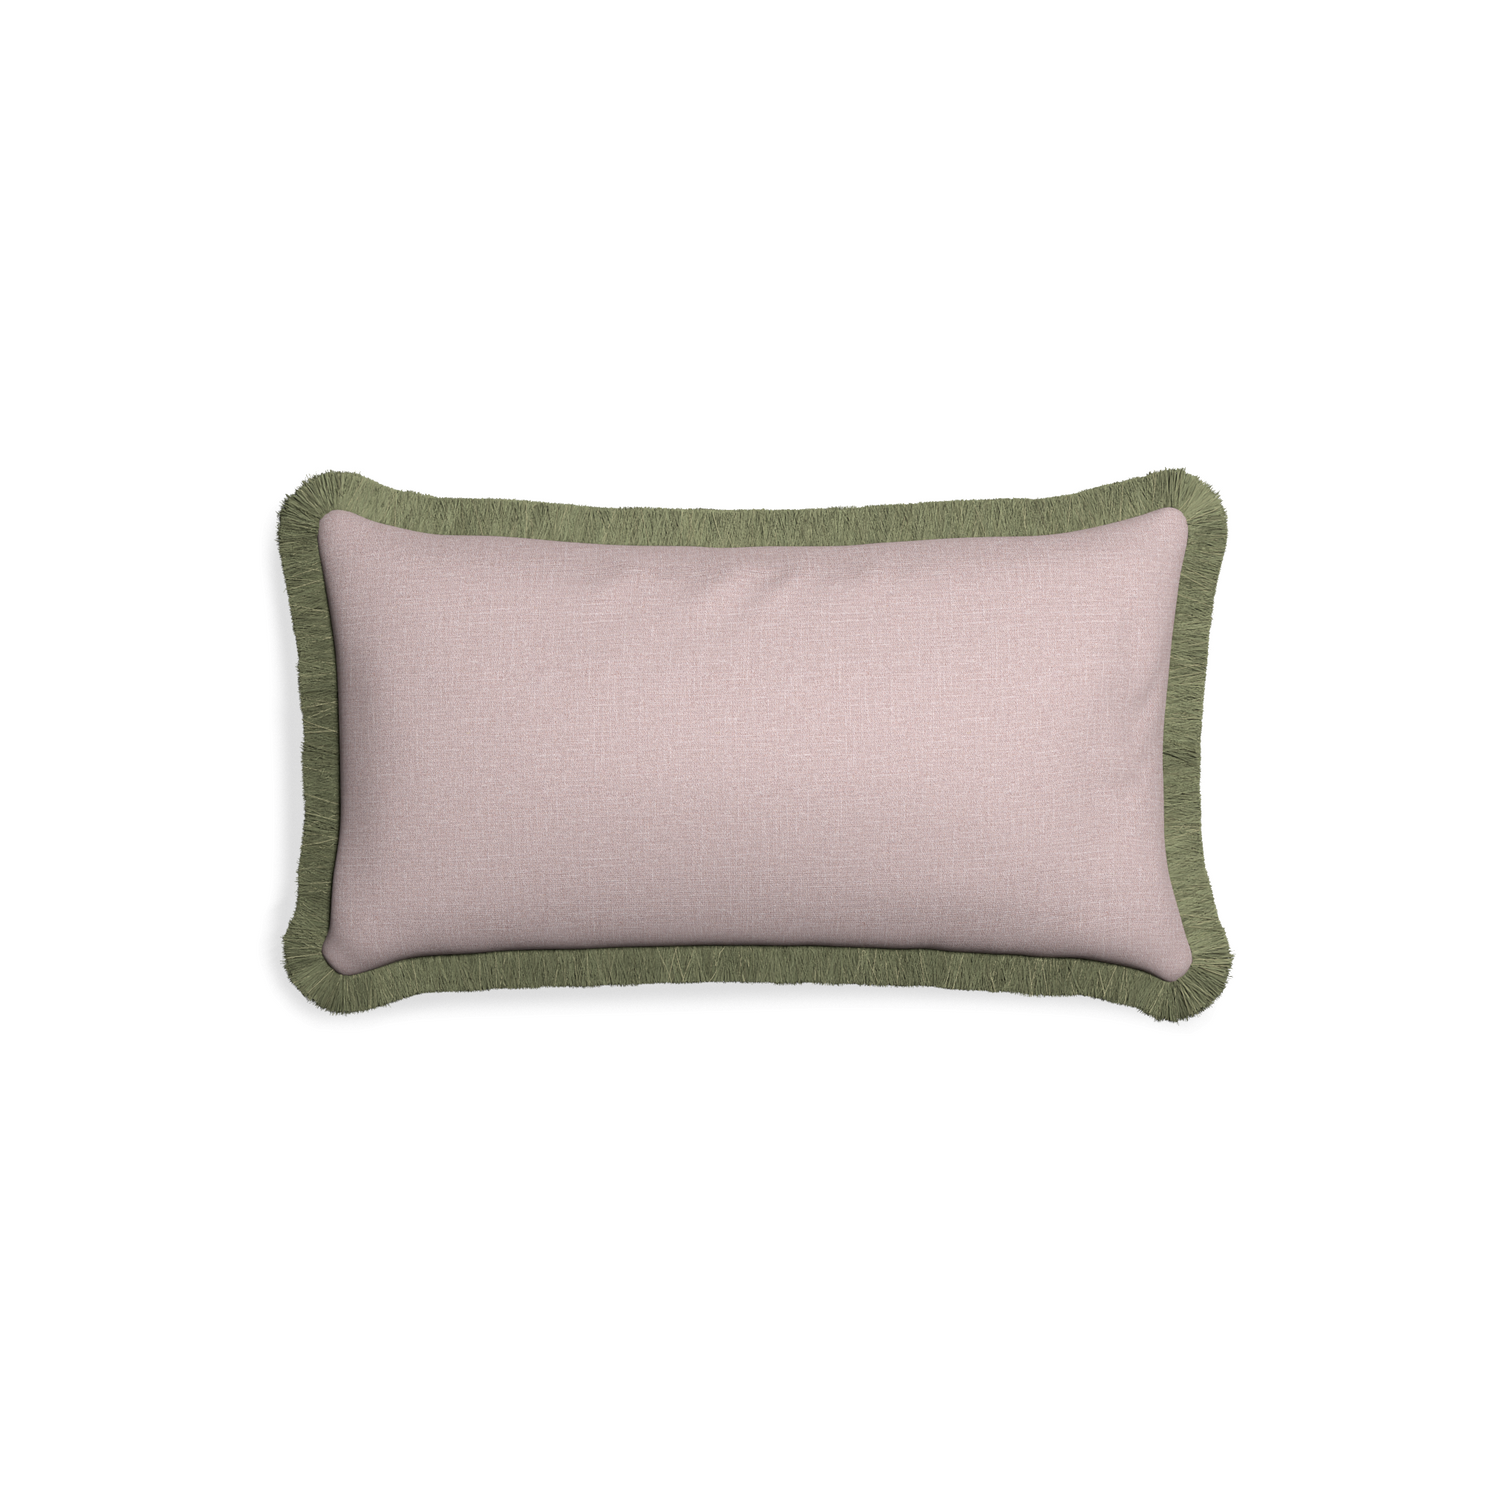 Petite-lumbar orchid custom mauve pinkpillow with sage fringe on white background